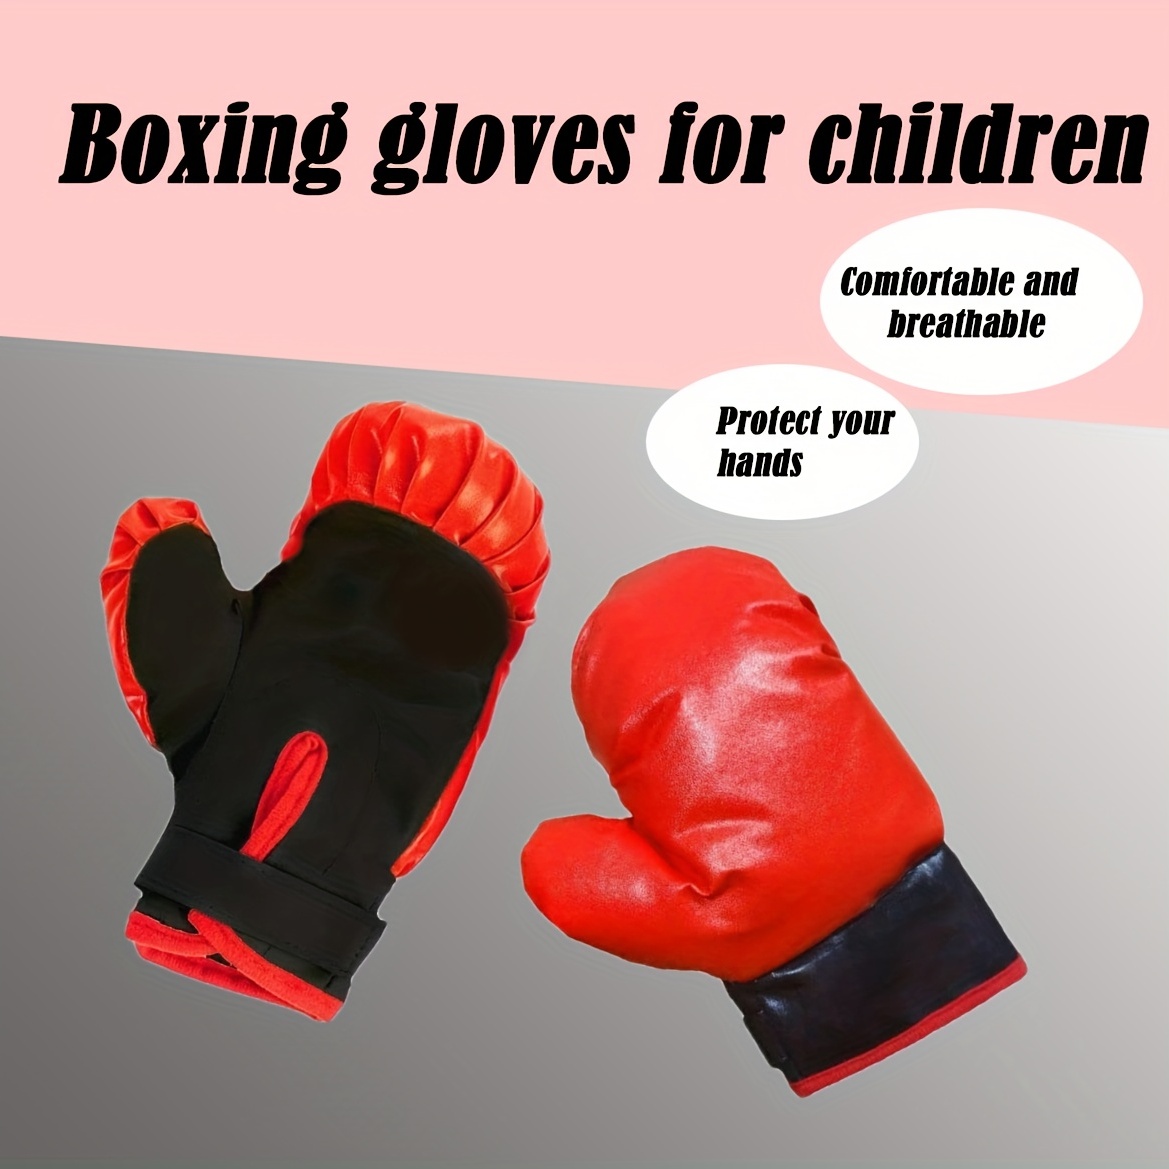 Kids Punching Bag Toy Set Adjustable Stand Boxing Glove Speed Ball w/ Pump  New